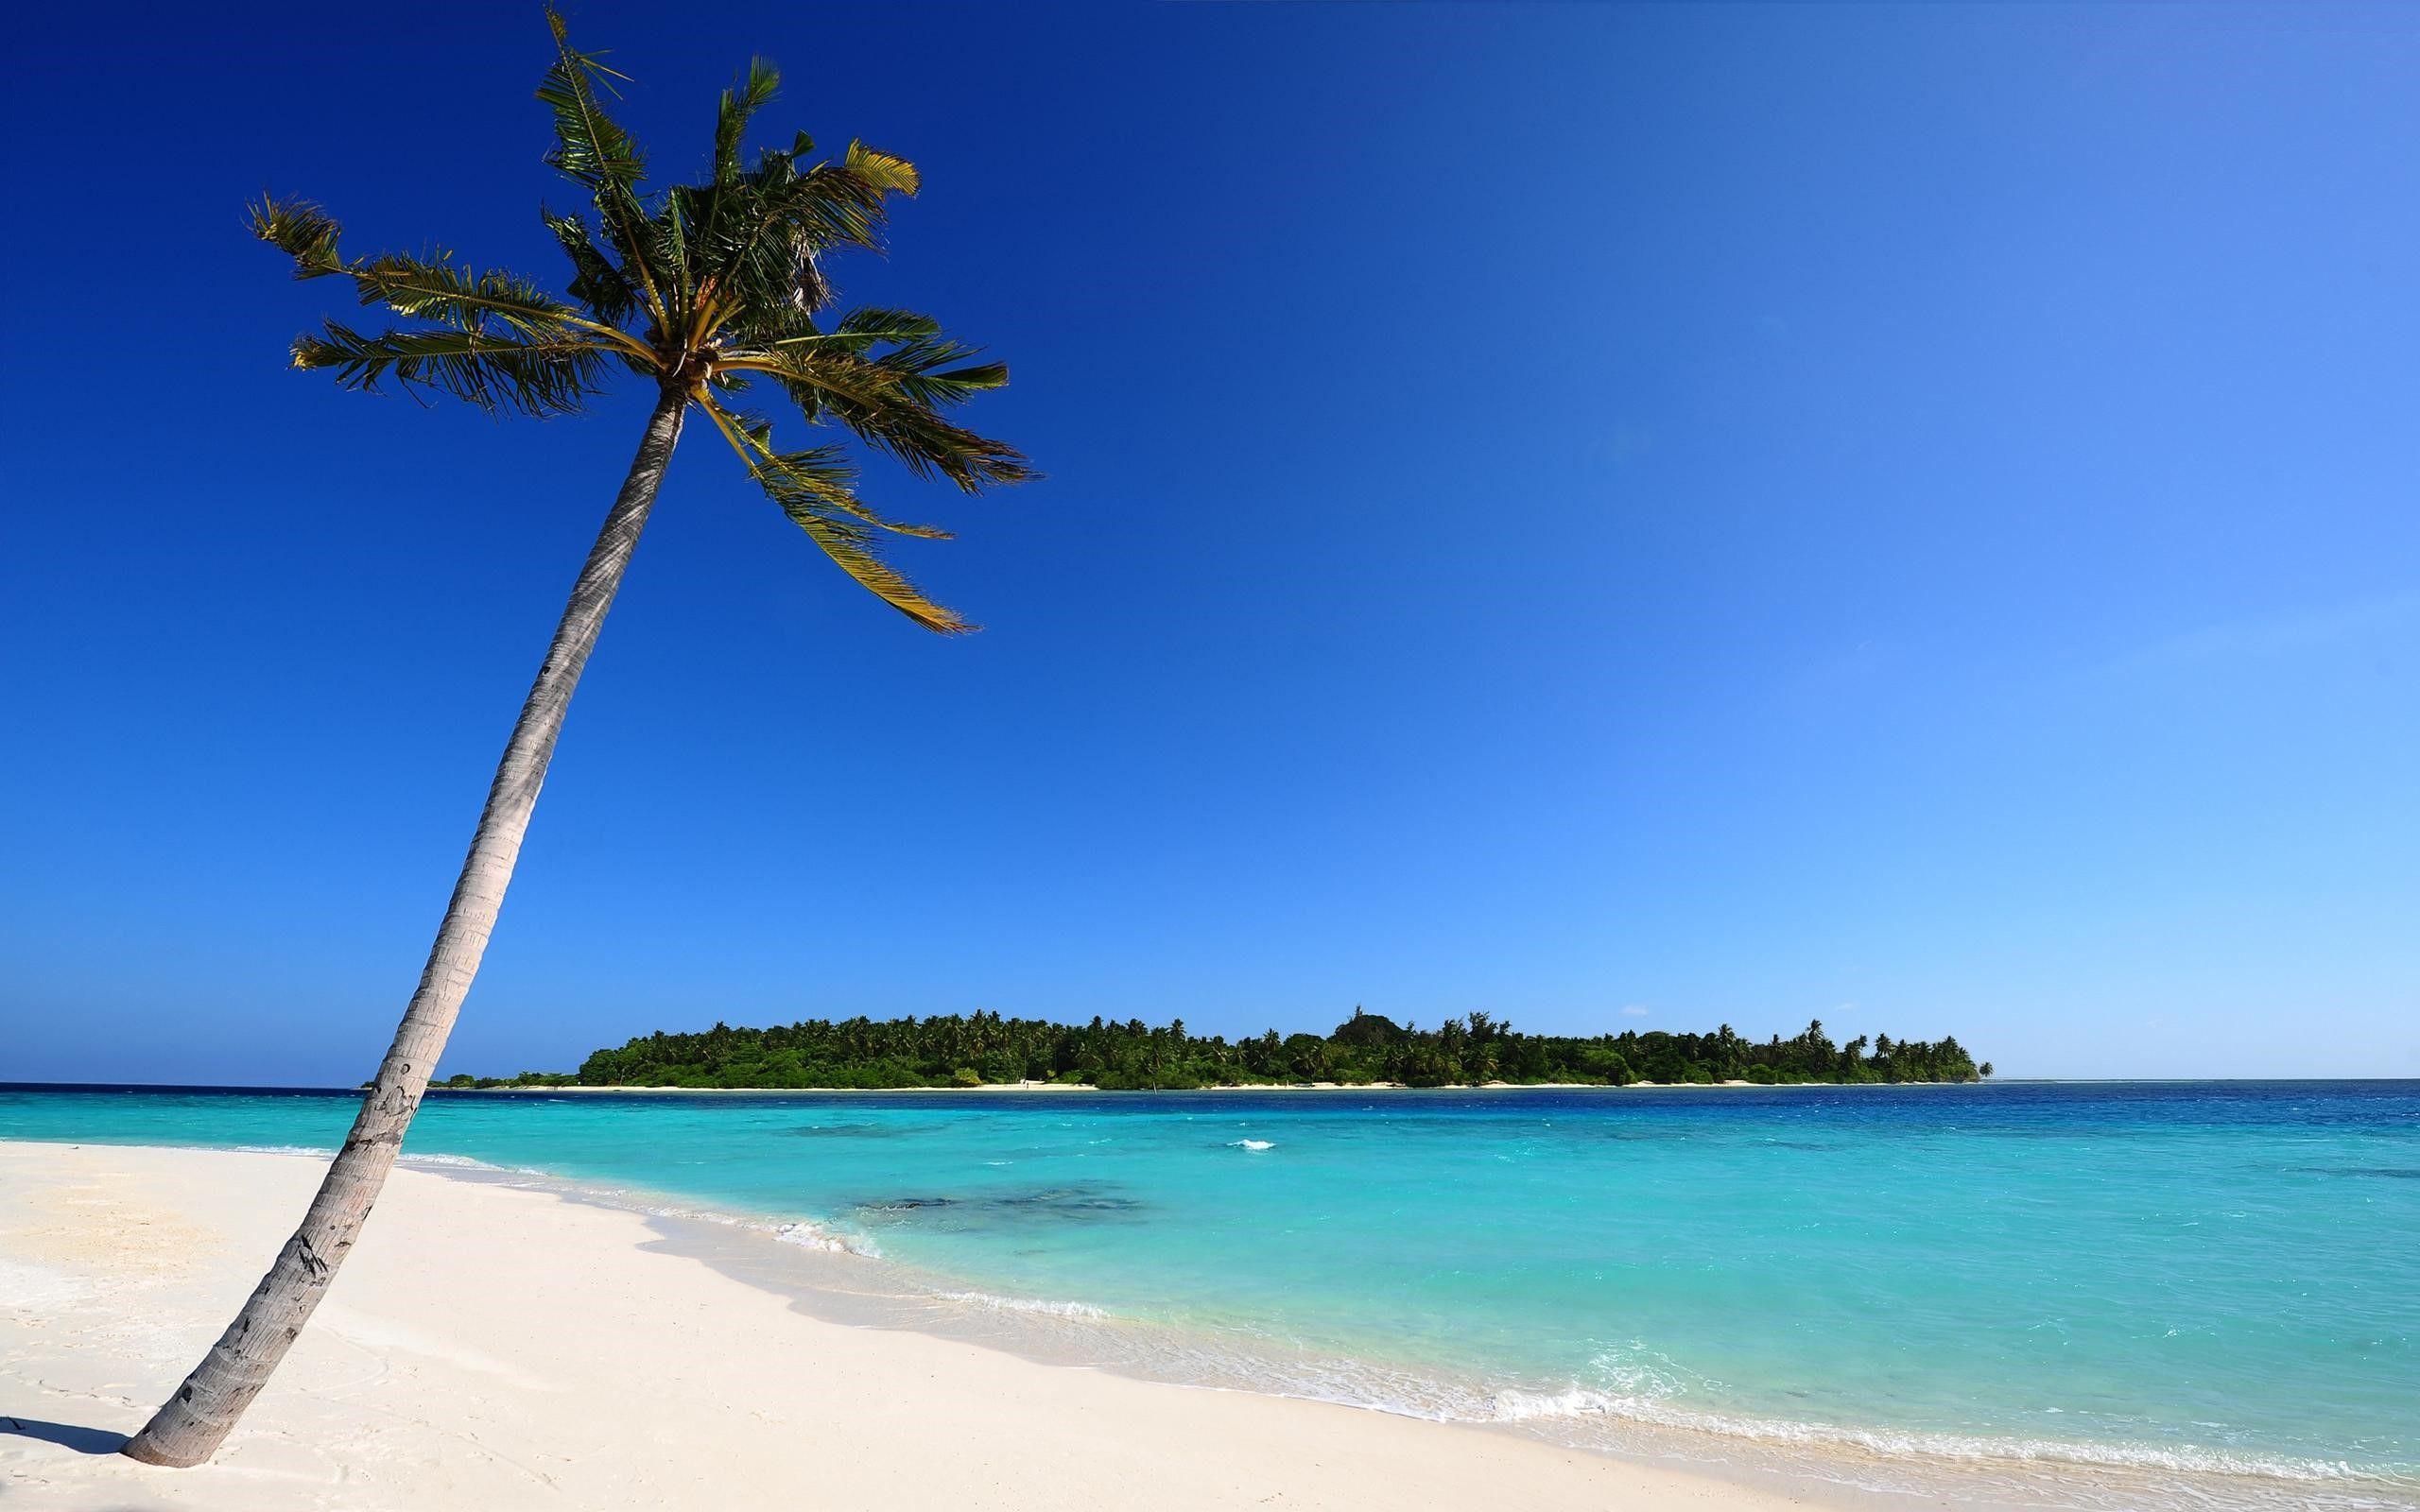 Coconut Trees HD Wallpaper Image Picture Photo Download